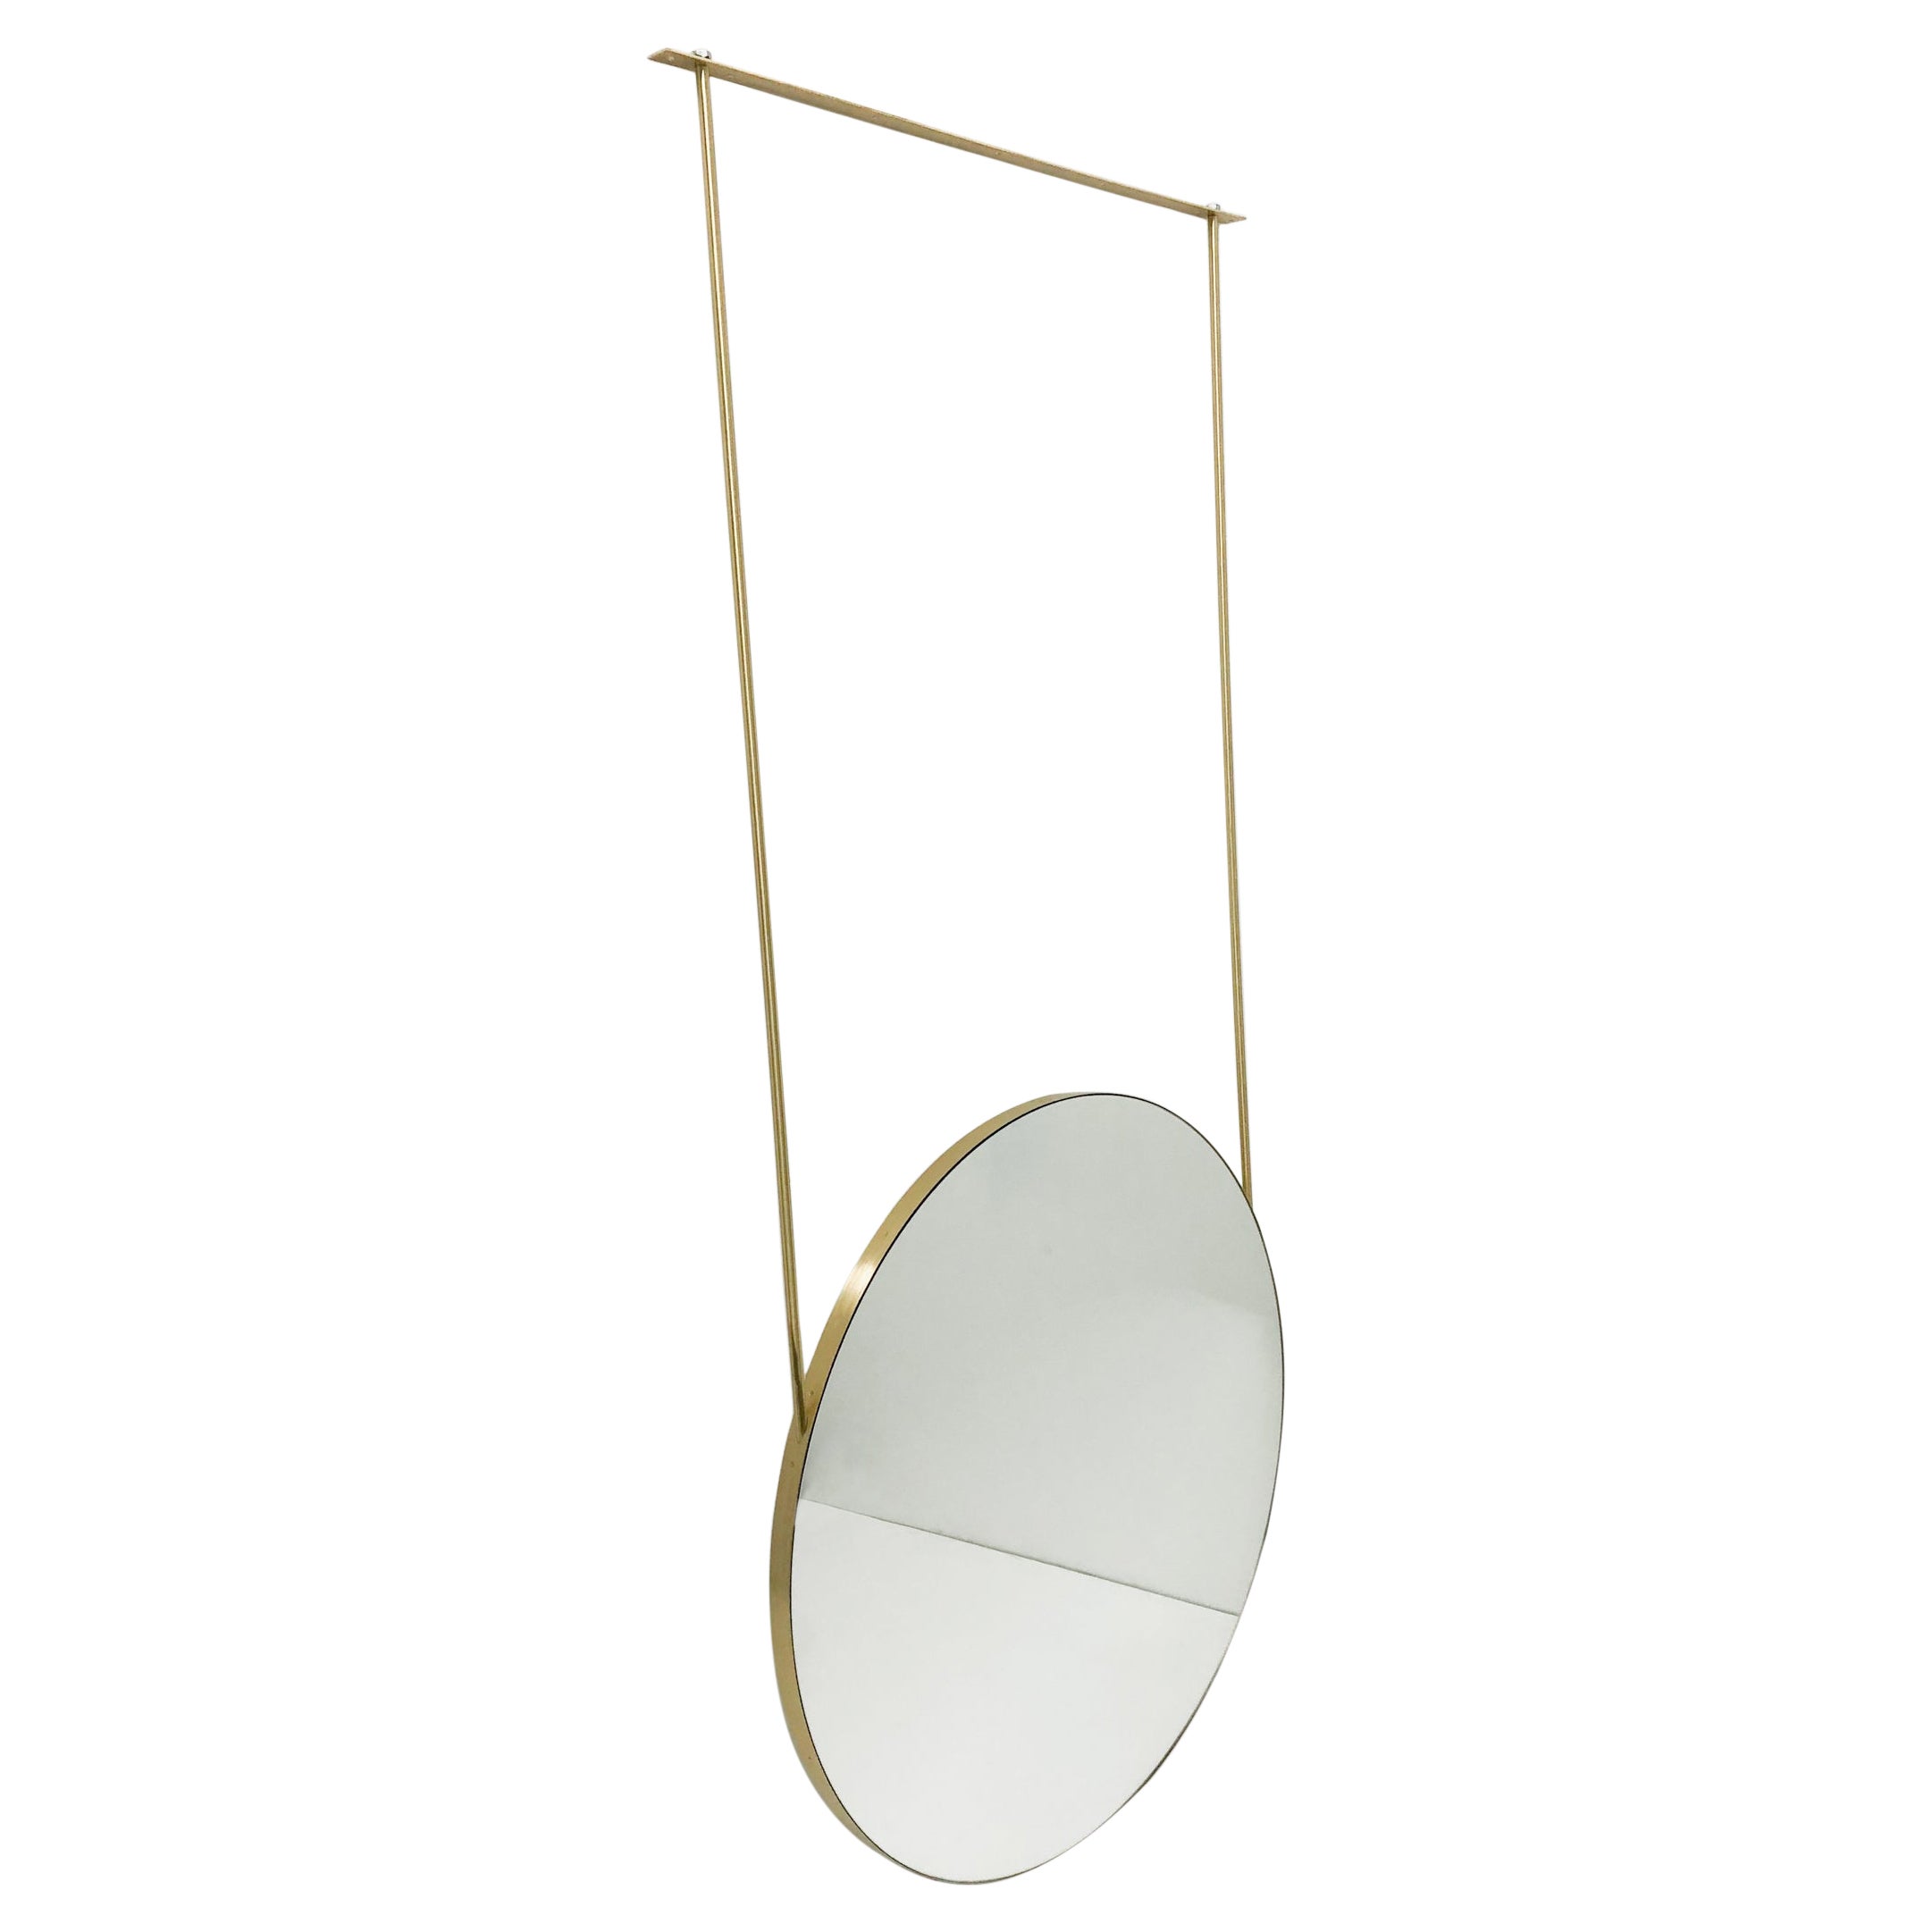 Orbis Ceiling Suspended Round Mirror with Brushed Brass Frame and Two Arms